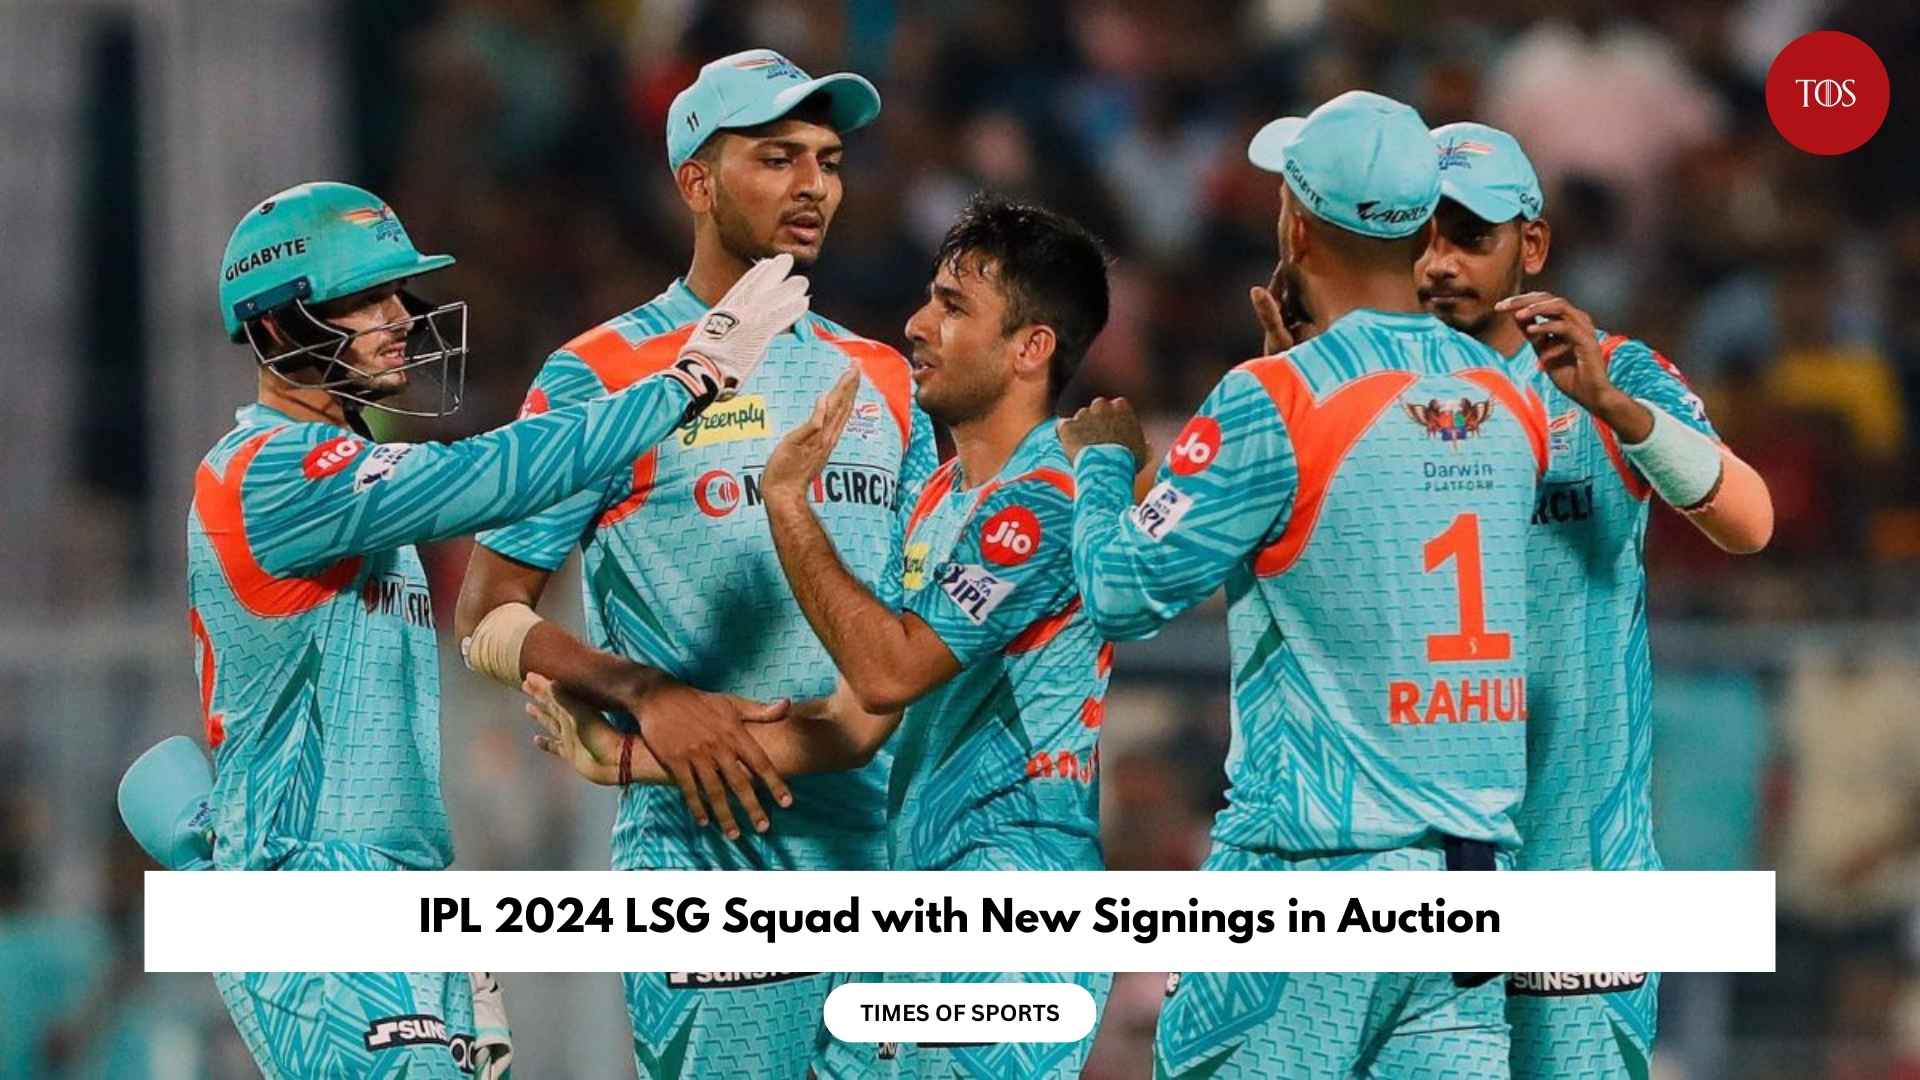 IPL 2024 LSG Squad with New Signings in Auction